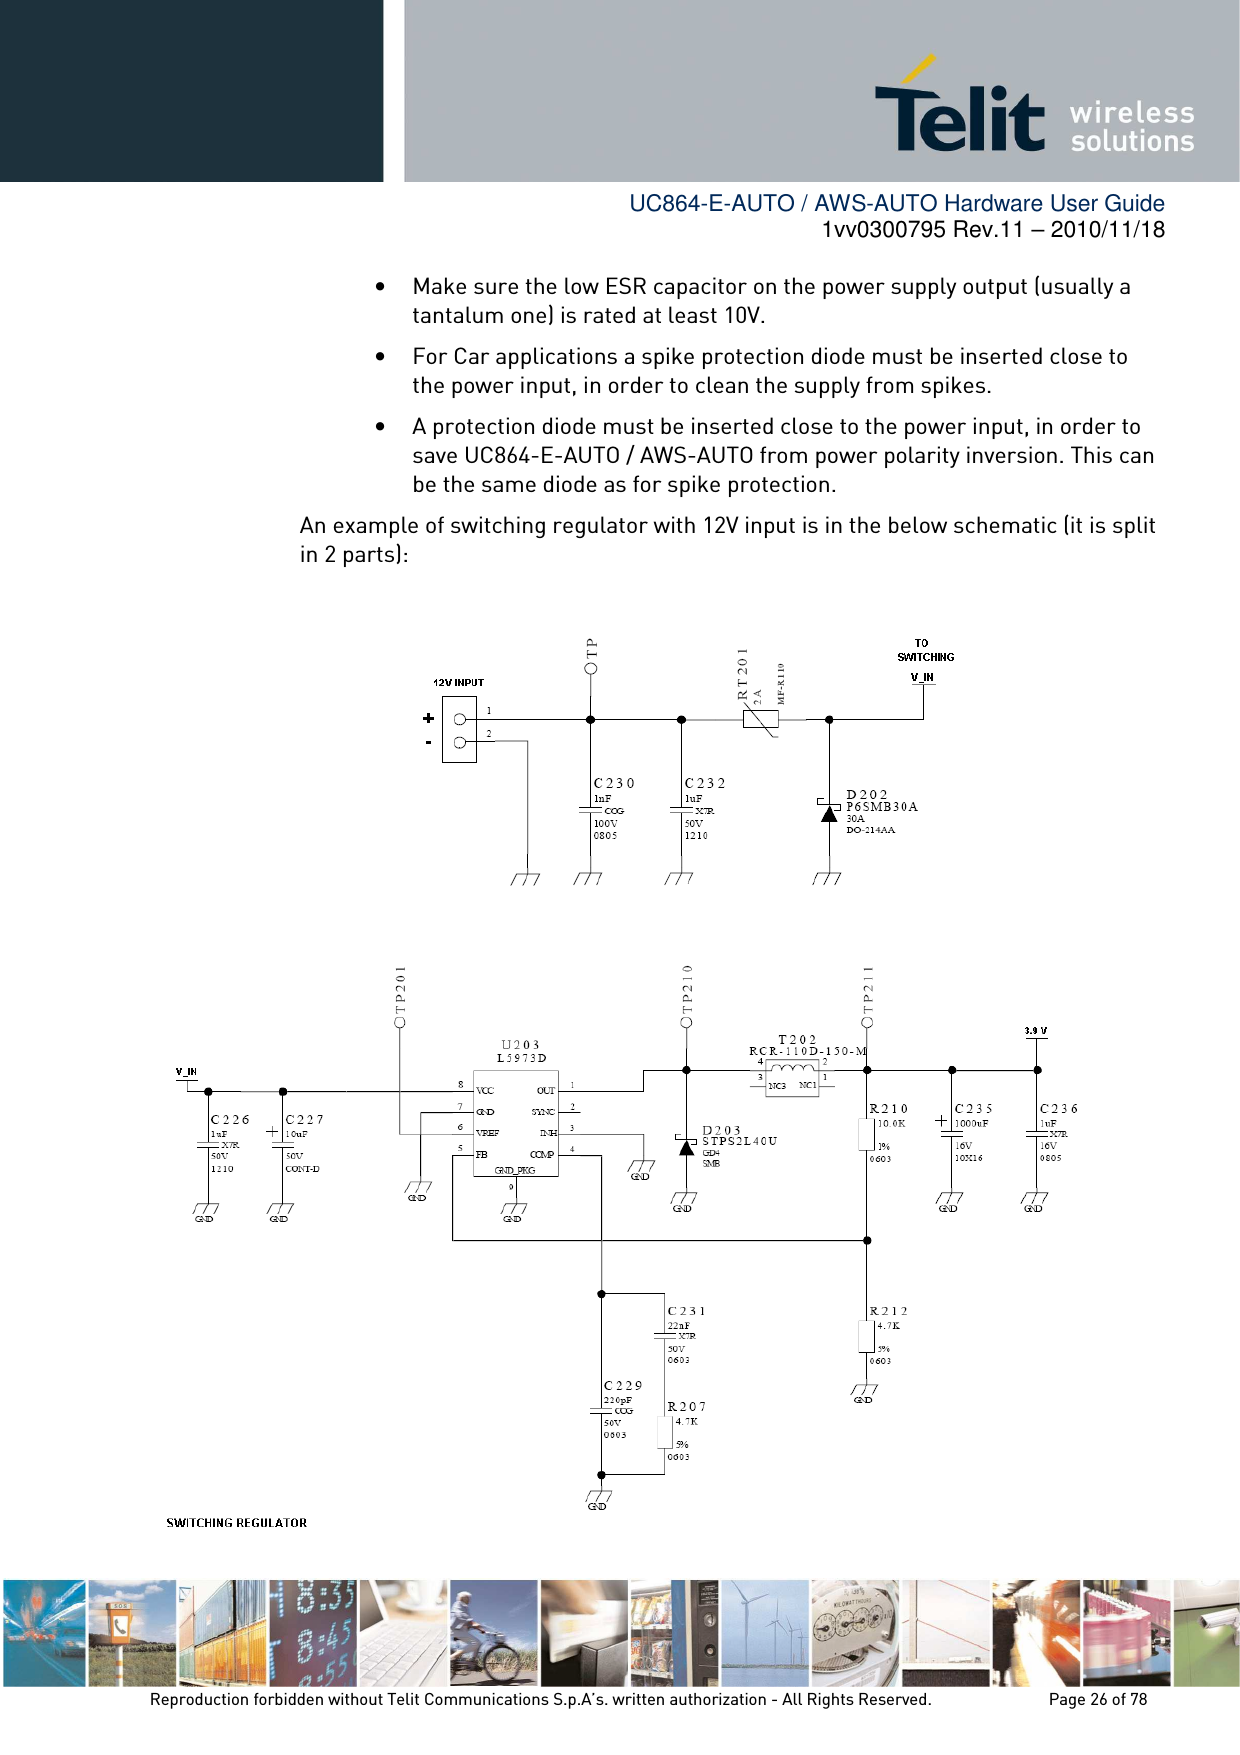        UC864-E-AUTO / AWS-AUTO Hardware User Guide 1vv0300795 Rev.11 – 2010/11/18     Reproduction forbidden without Telit Communications S.p.A’s. written authorization - All Rights Reserved.    Page 26 of 78  • Make sure the low ESR capacitor on the power supply output (usually a tantalum one) is rated at least 10V. • For Car applications a spike protection diode must be inserted close to the power input, in order to clean the supply from spikes.  • A protection diode must be inserted close to the power input, in order to save UC864-E-AUTO / AWS-AUTO from power polarity inversion. This can be the same diode as for spike protection. An example of switching regulator with 12V input is in the below schematic (it is split in 2 parts): 